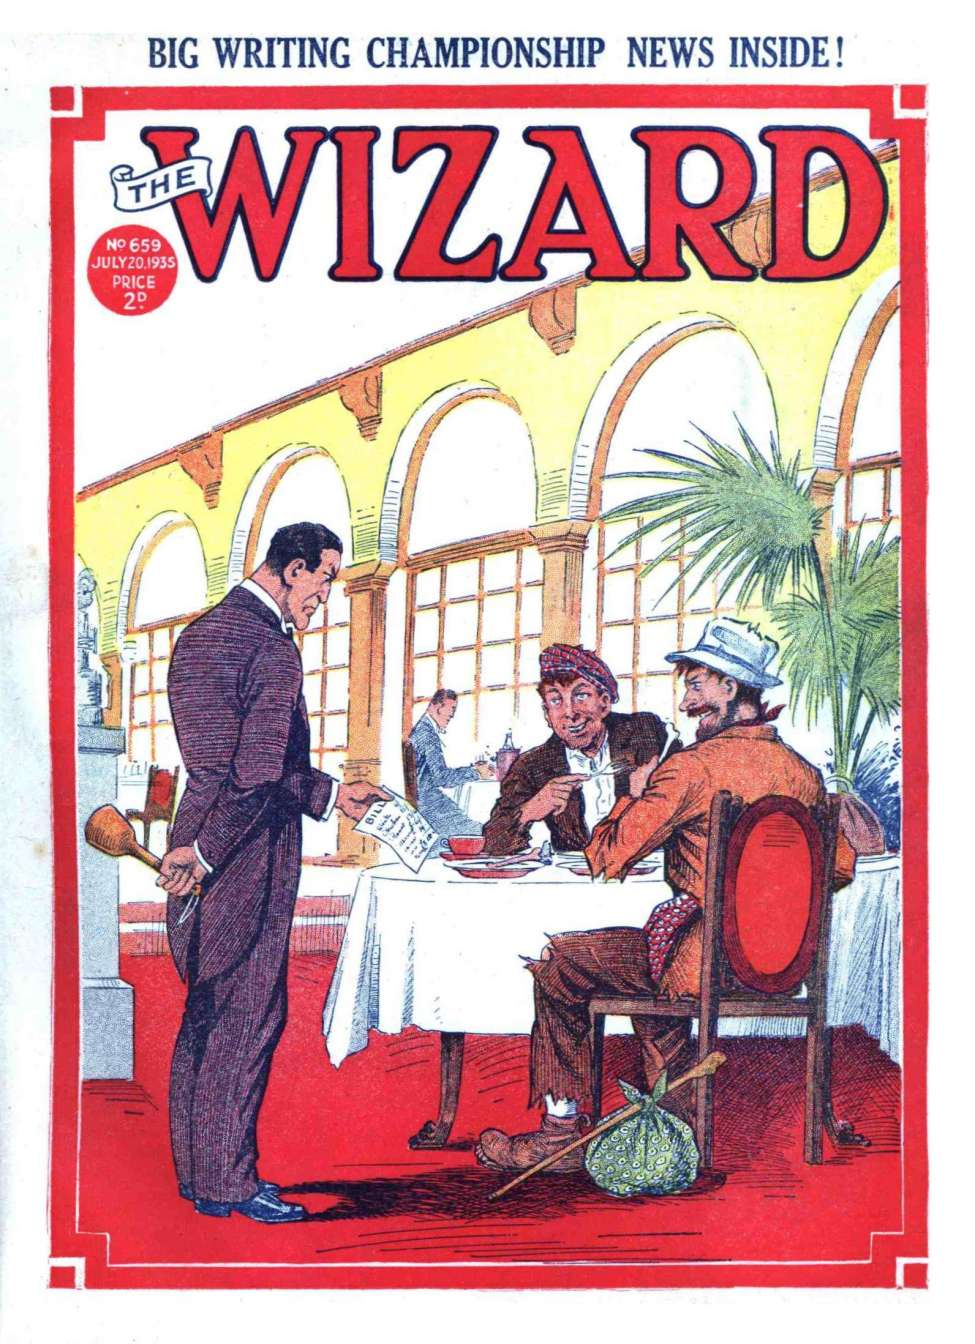 Book Cover For The Wizard 659